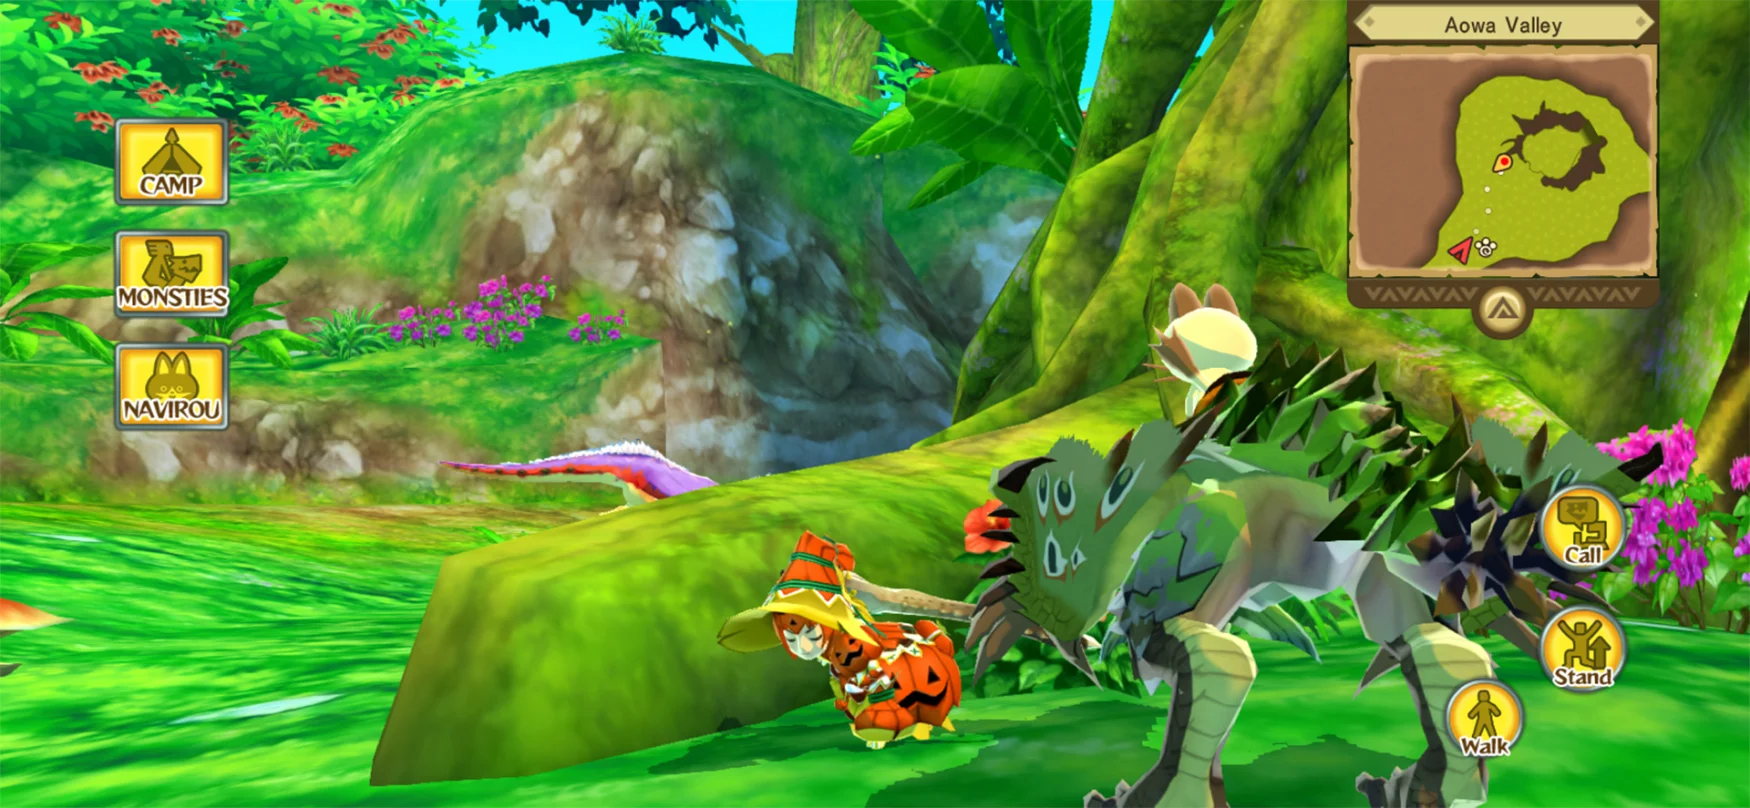 'Monster Hunter Stories' from Apple Arcade on iPhone